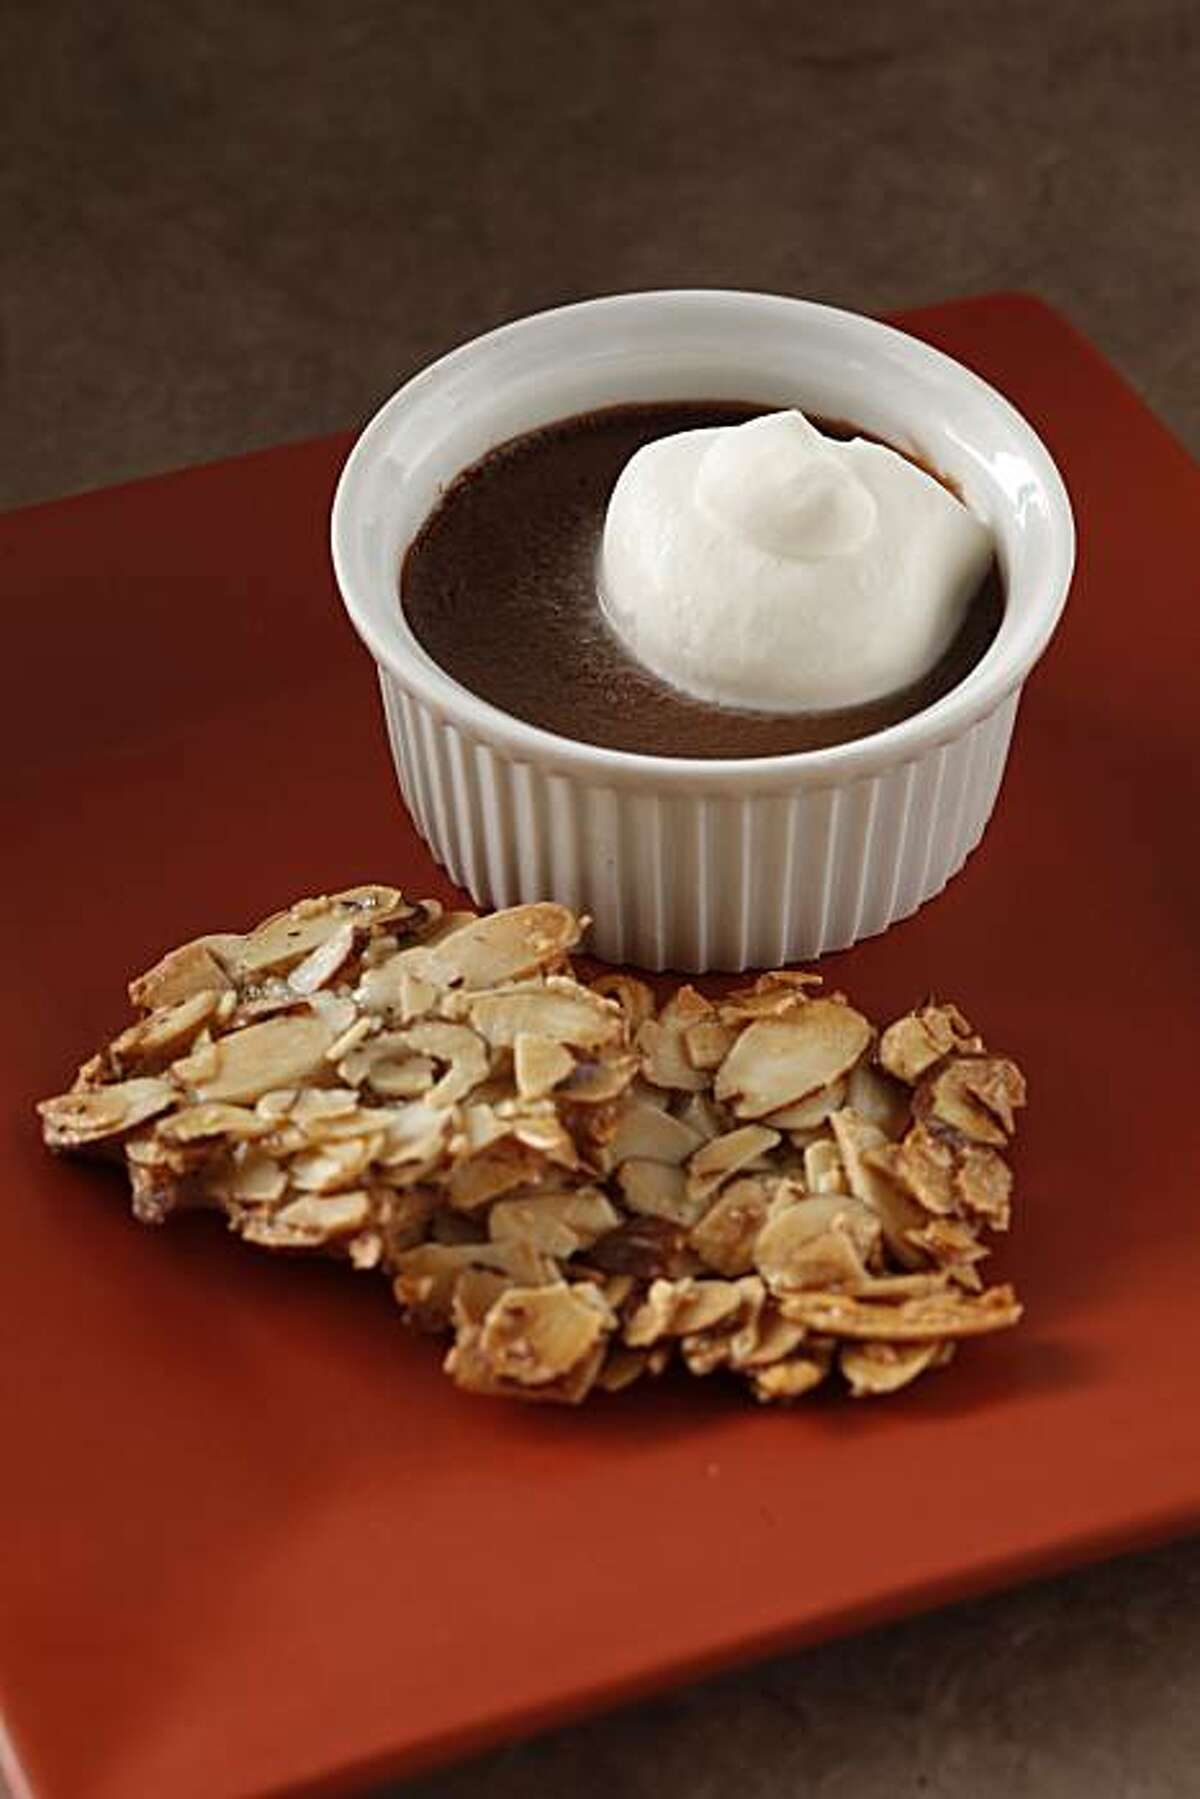 Chocolate pots de creme (Foreign Cinema) with Naomi's Almond Wafers as seen in San Francisco, California, on January 19, 2011. Food styled by Kelly Rae Hickman.